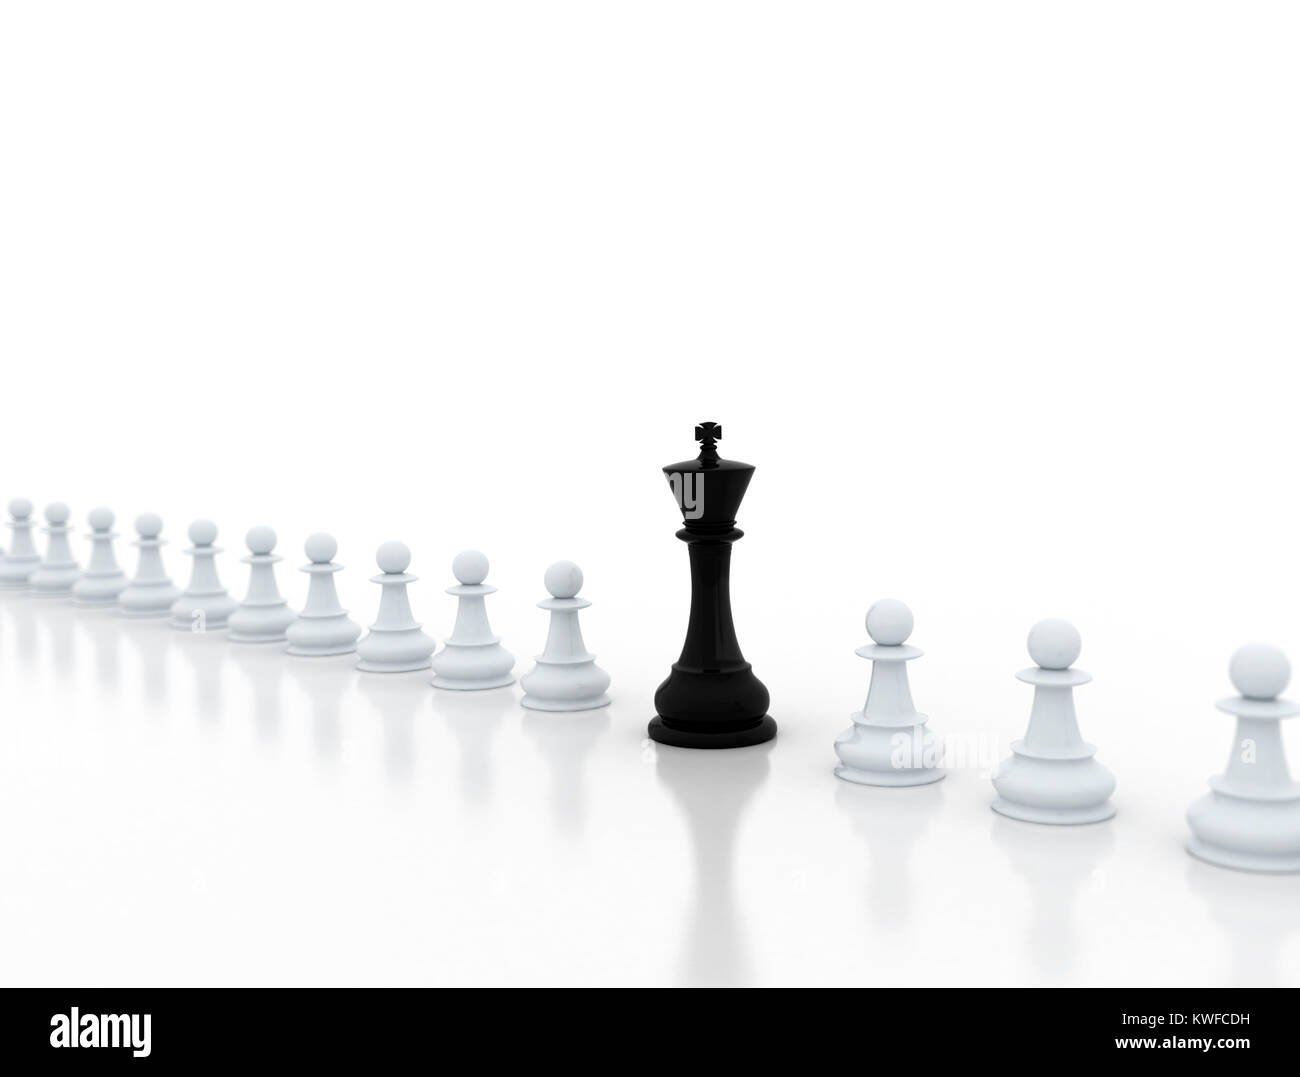 King And Pawns In 3d Chess Set Background, Chess Game, Pawn, Chess Pieces  Background Image And Wallpaper for Free Download